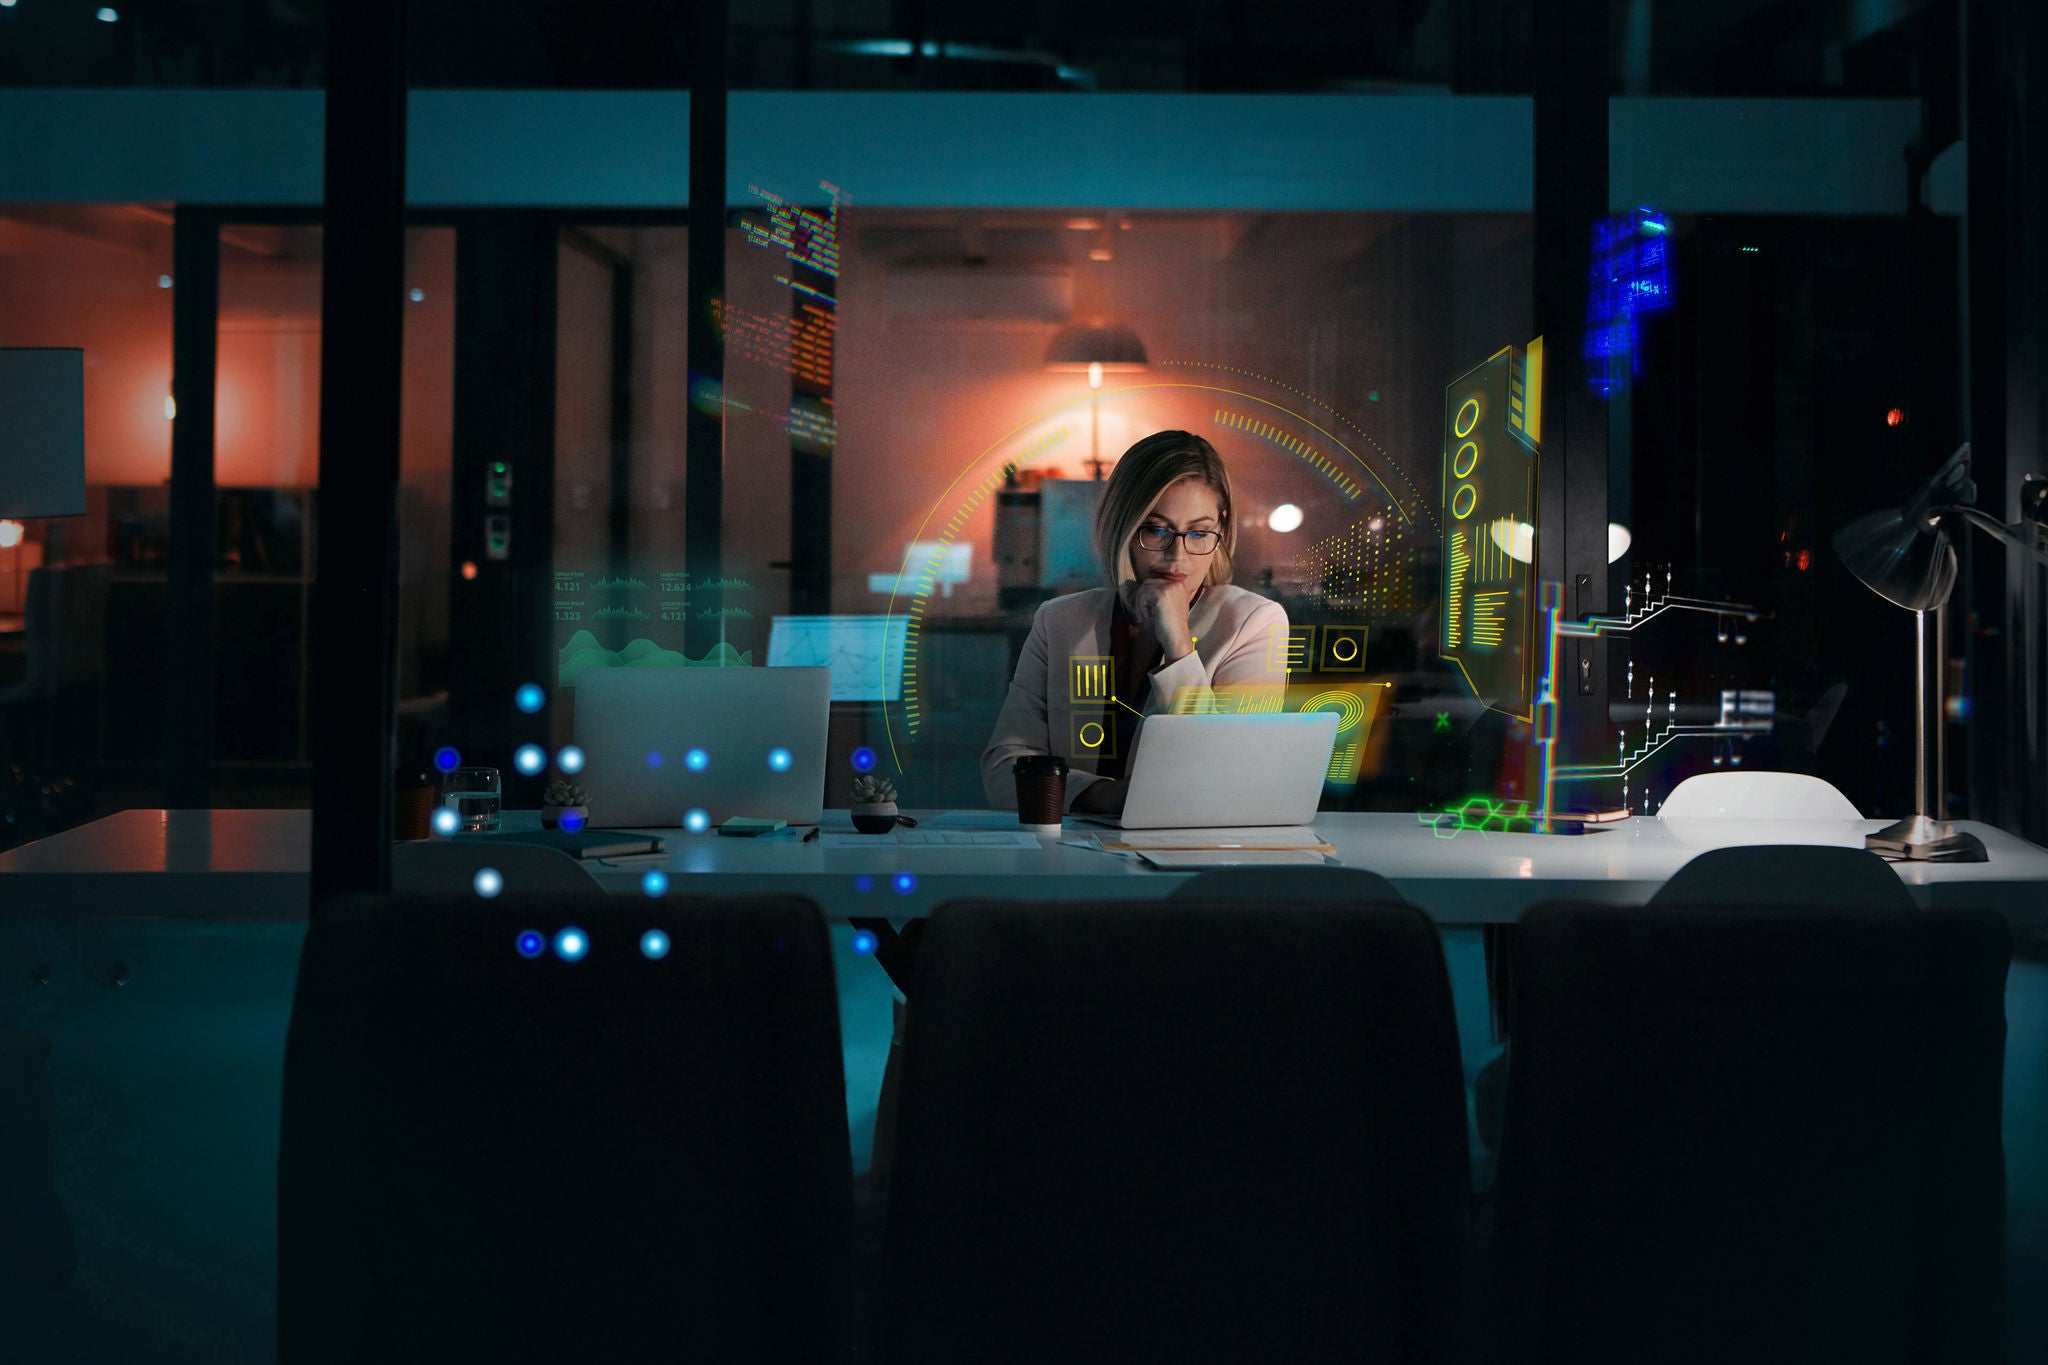 Businesswoman using a laptop at her desk during a late night at work